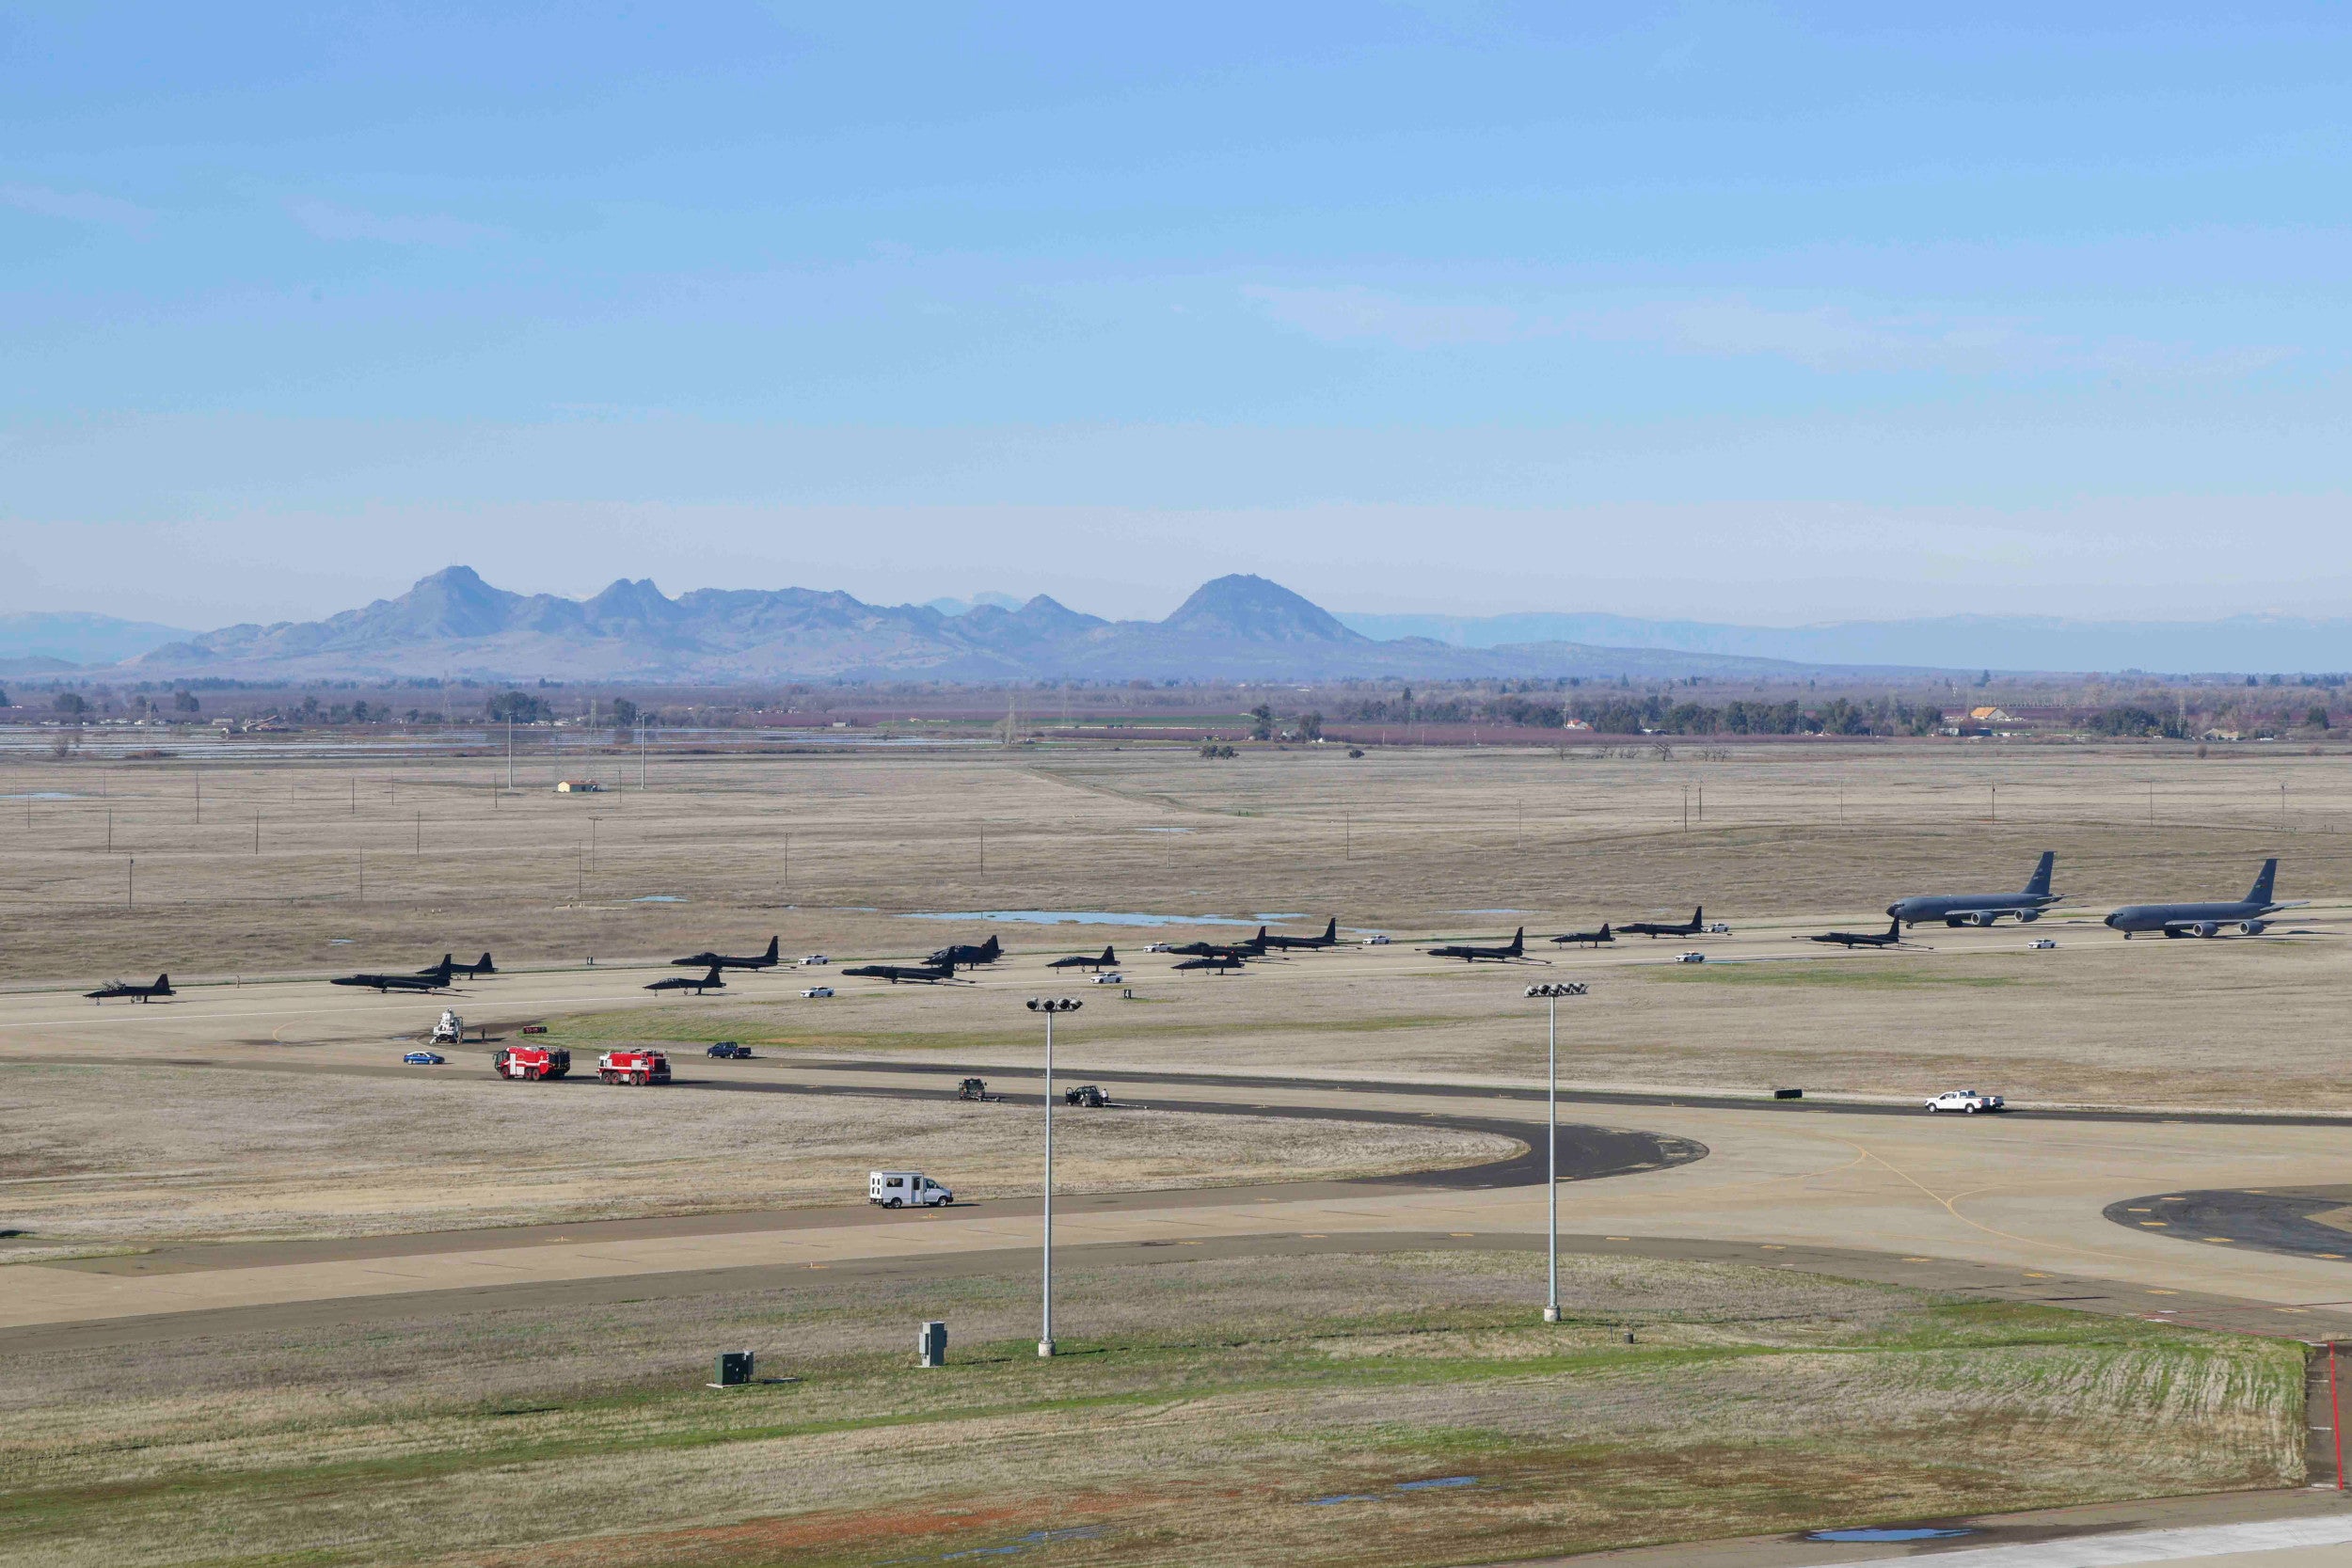 U.S. Air Force T-38 Talon’s from the 1st Reconnaissance Squadron, U-2 Dragon Lady’s and chase cars from the 99th Reconnaissance Squadron, and KC-135R Stratotanker’s from the 940th Air Refueling Wing conduct an elephant walk on Beale Air Force Base, California, Jan. 4, 2023. The elephant walk showcased a display of joint airpower between the 9th Reconnaissance Wing and 940th hosted at Beale. (U.S. Air Force photo by Staff Sgt. Frederick A. Brown)